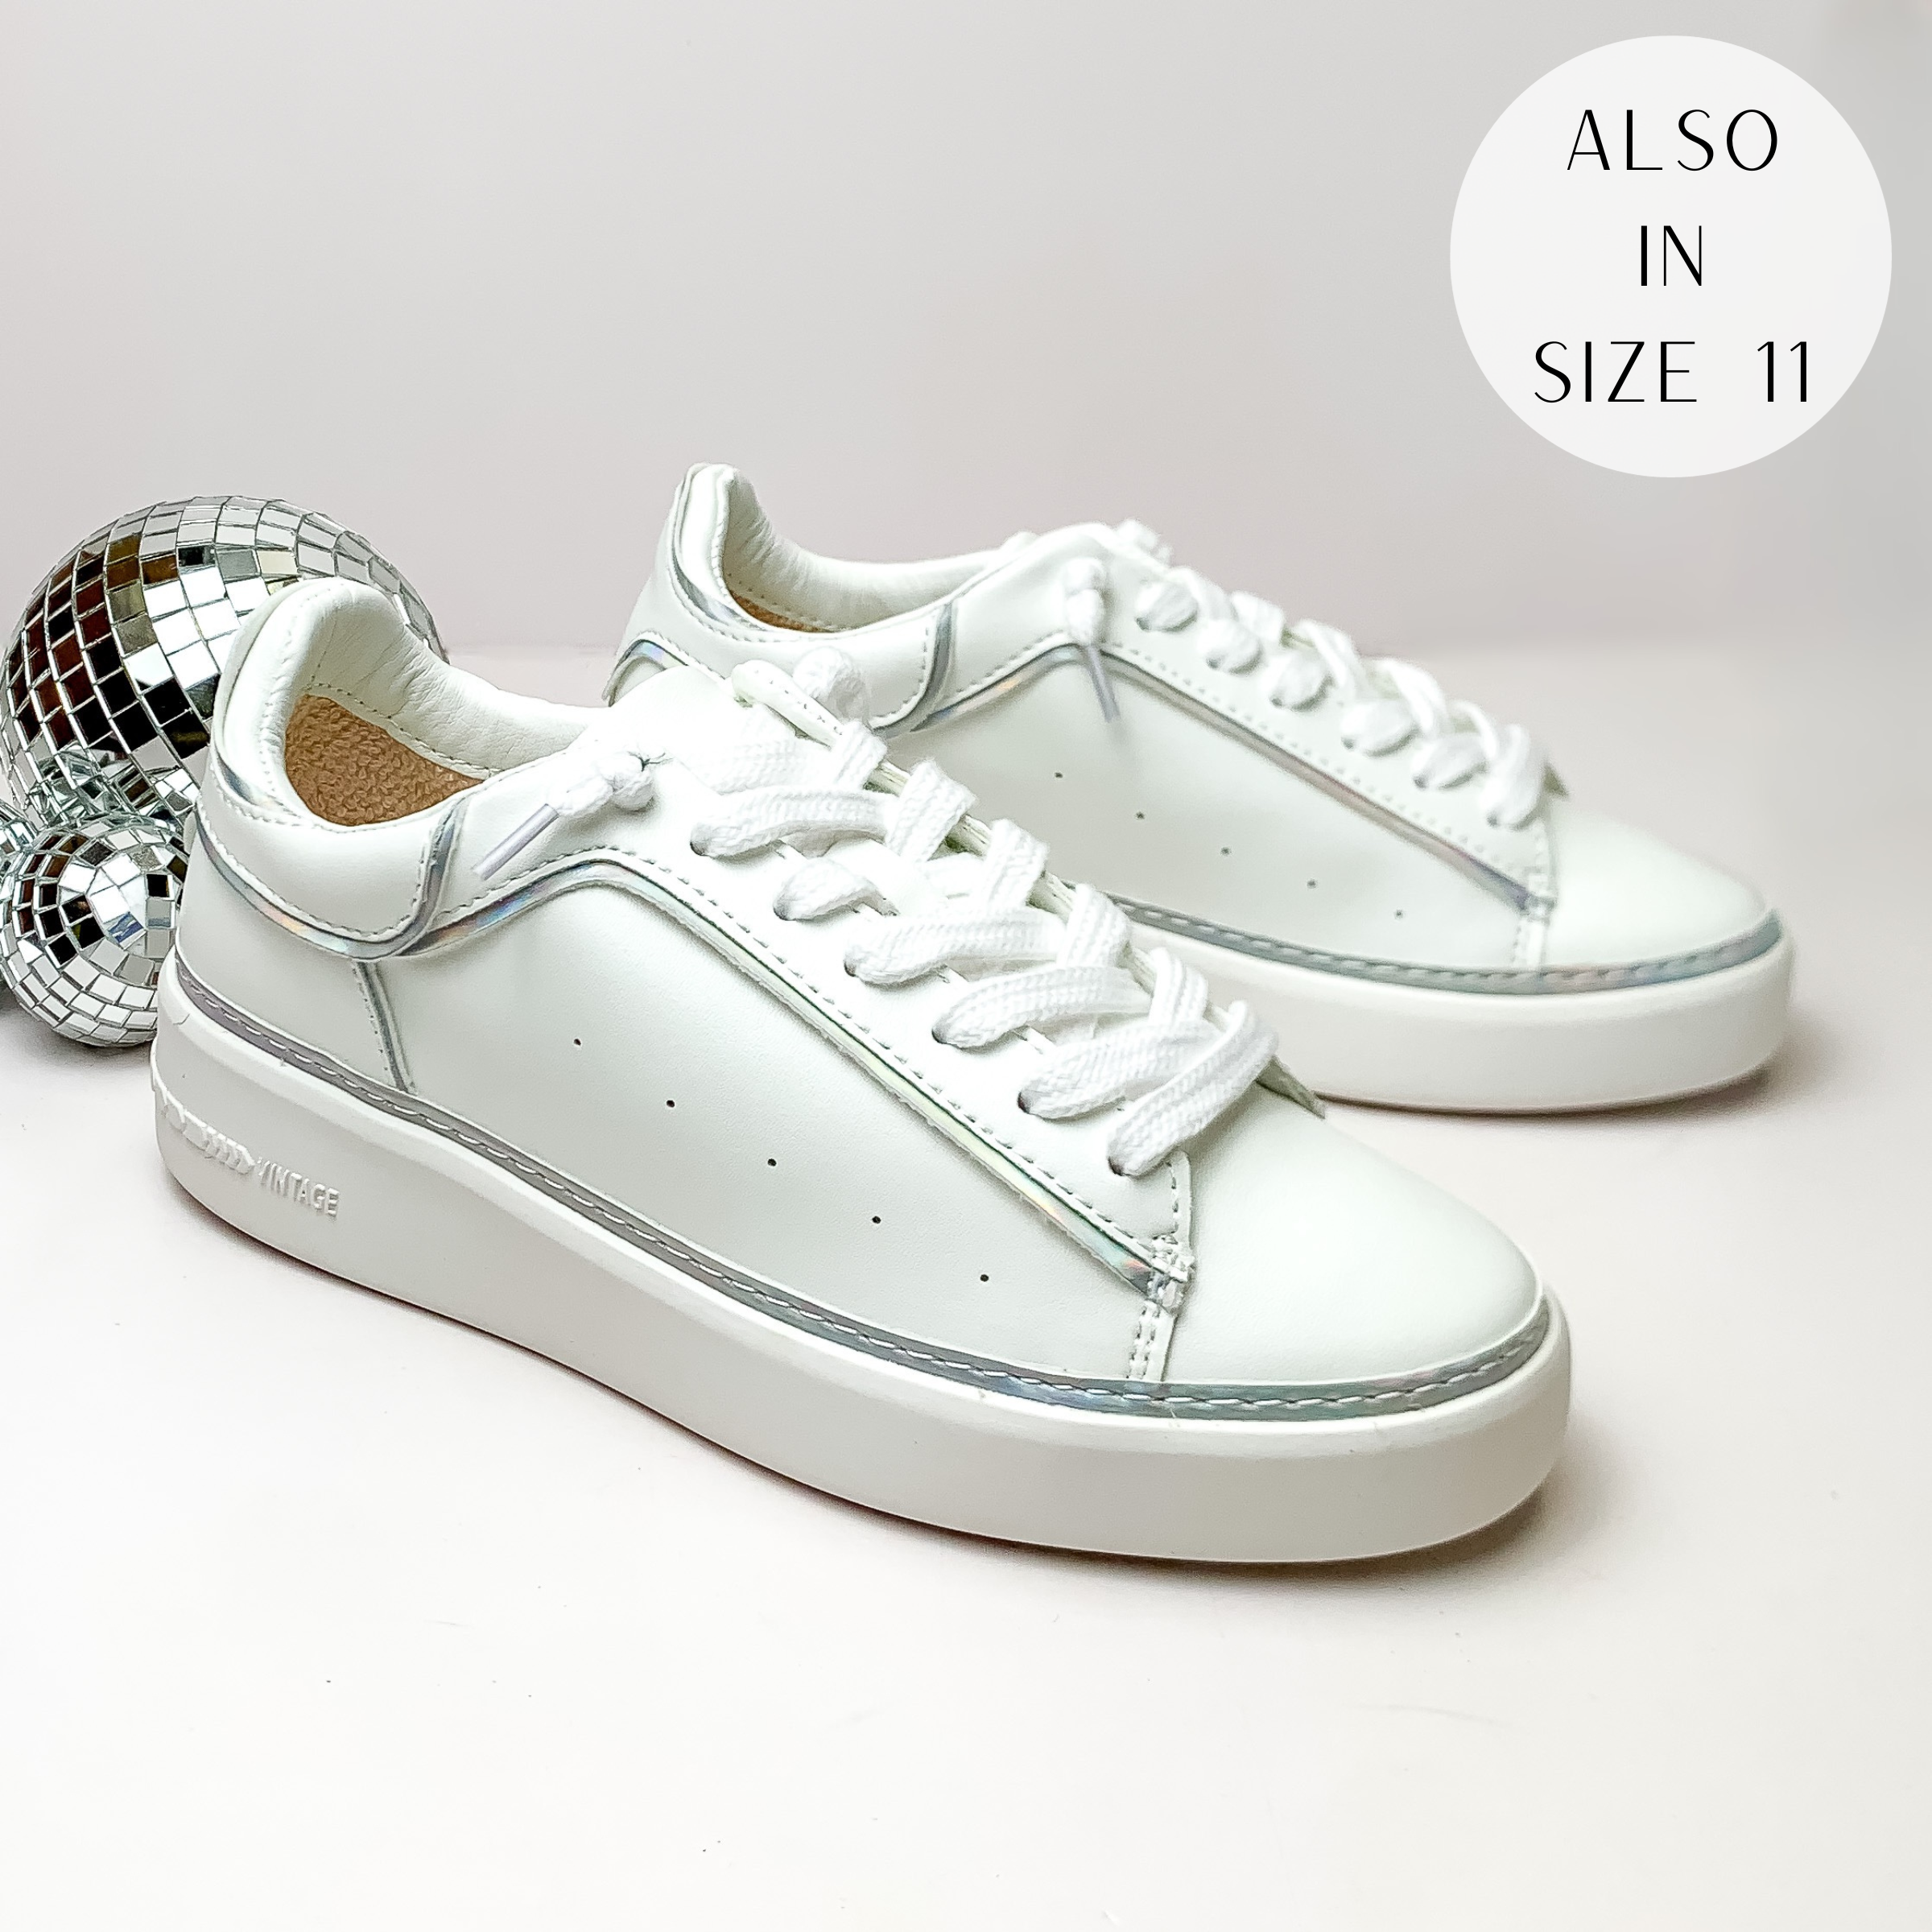 Pictured is a pair of white tennis shoes with white laces and a silver iridescent outline. These shoes are pictured on a white background with disco balls on the left side